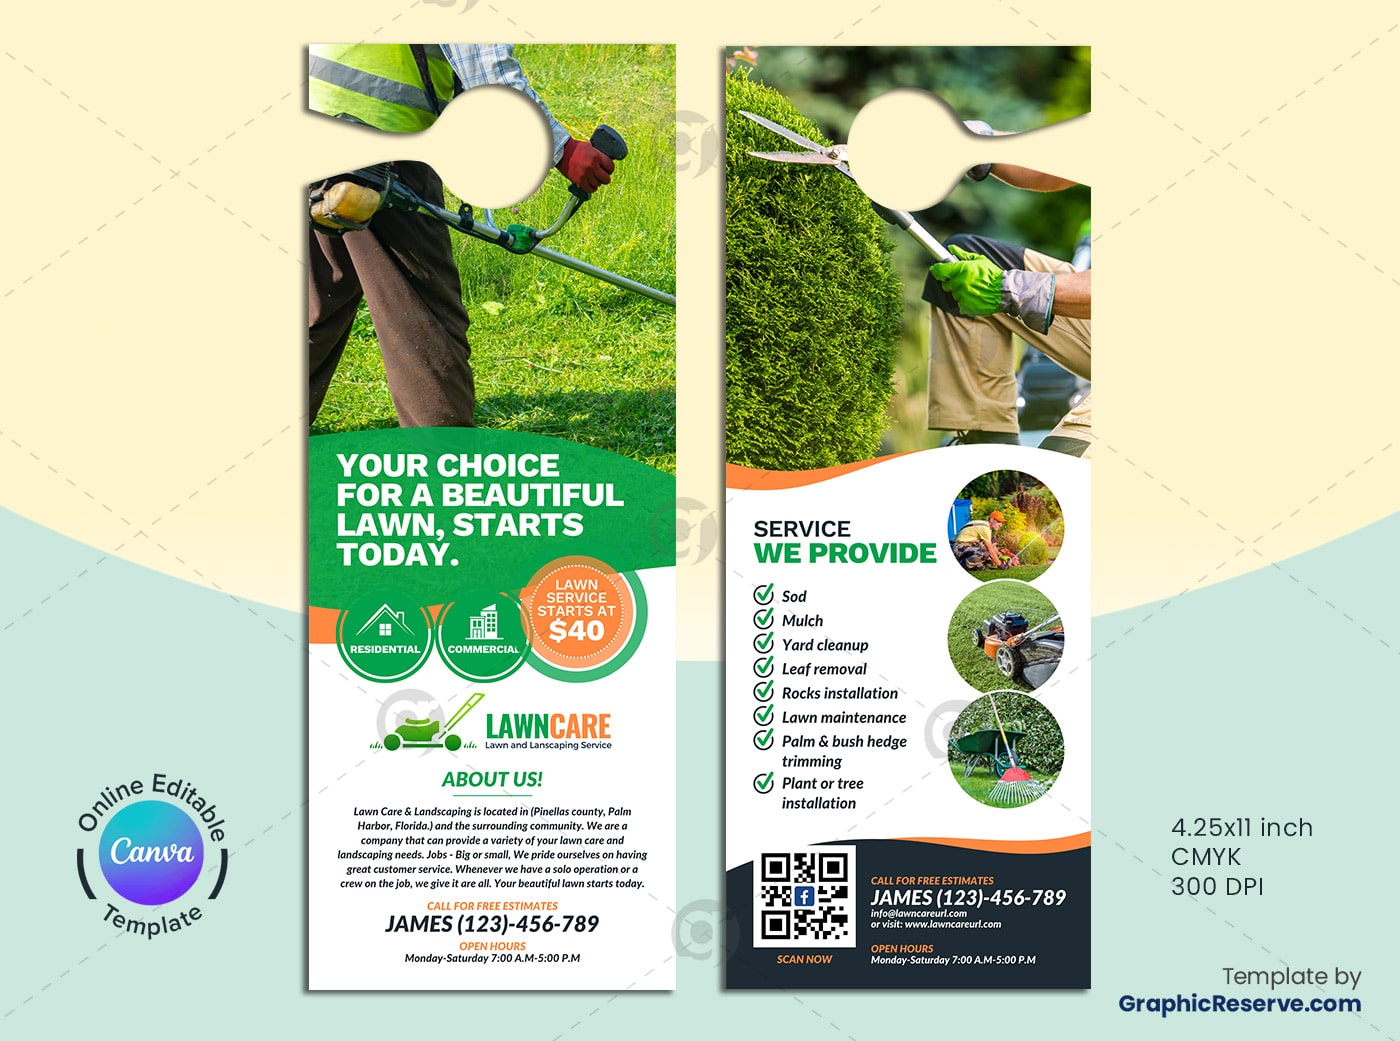 Lawn Care Service Door Hanger Canva Template Graphic Reserve